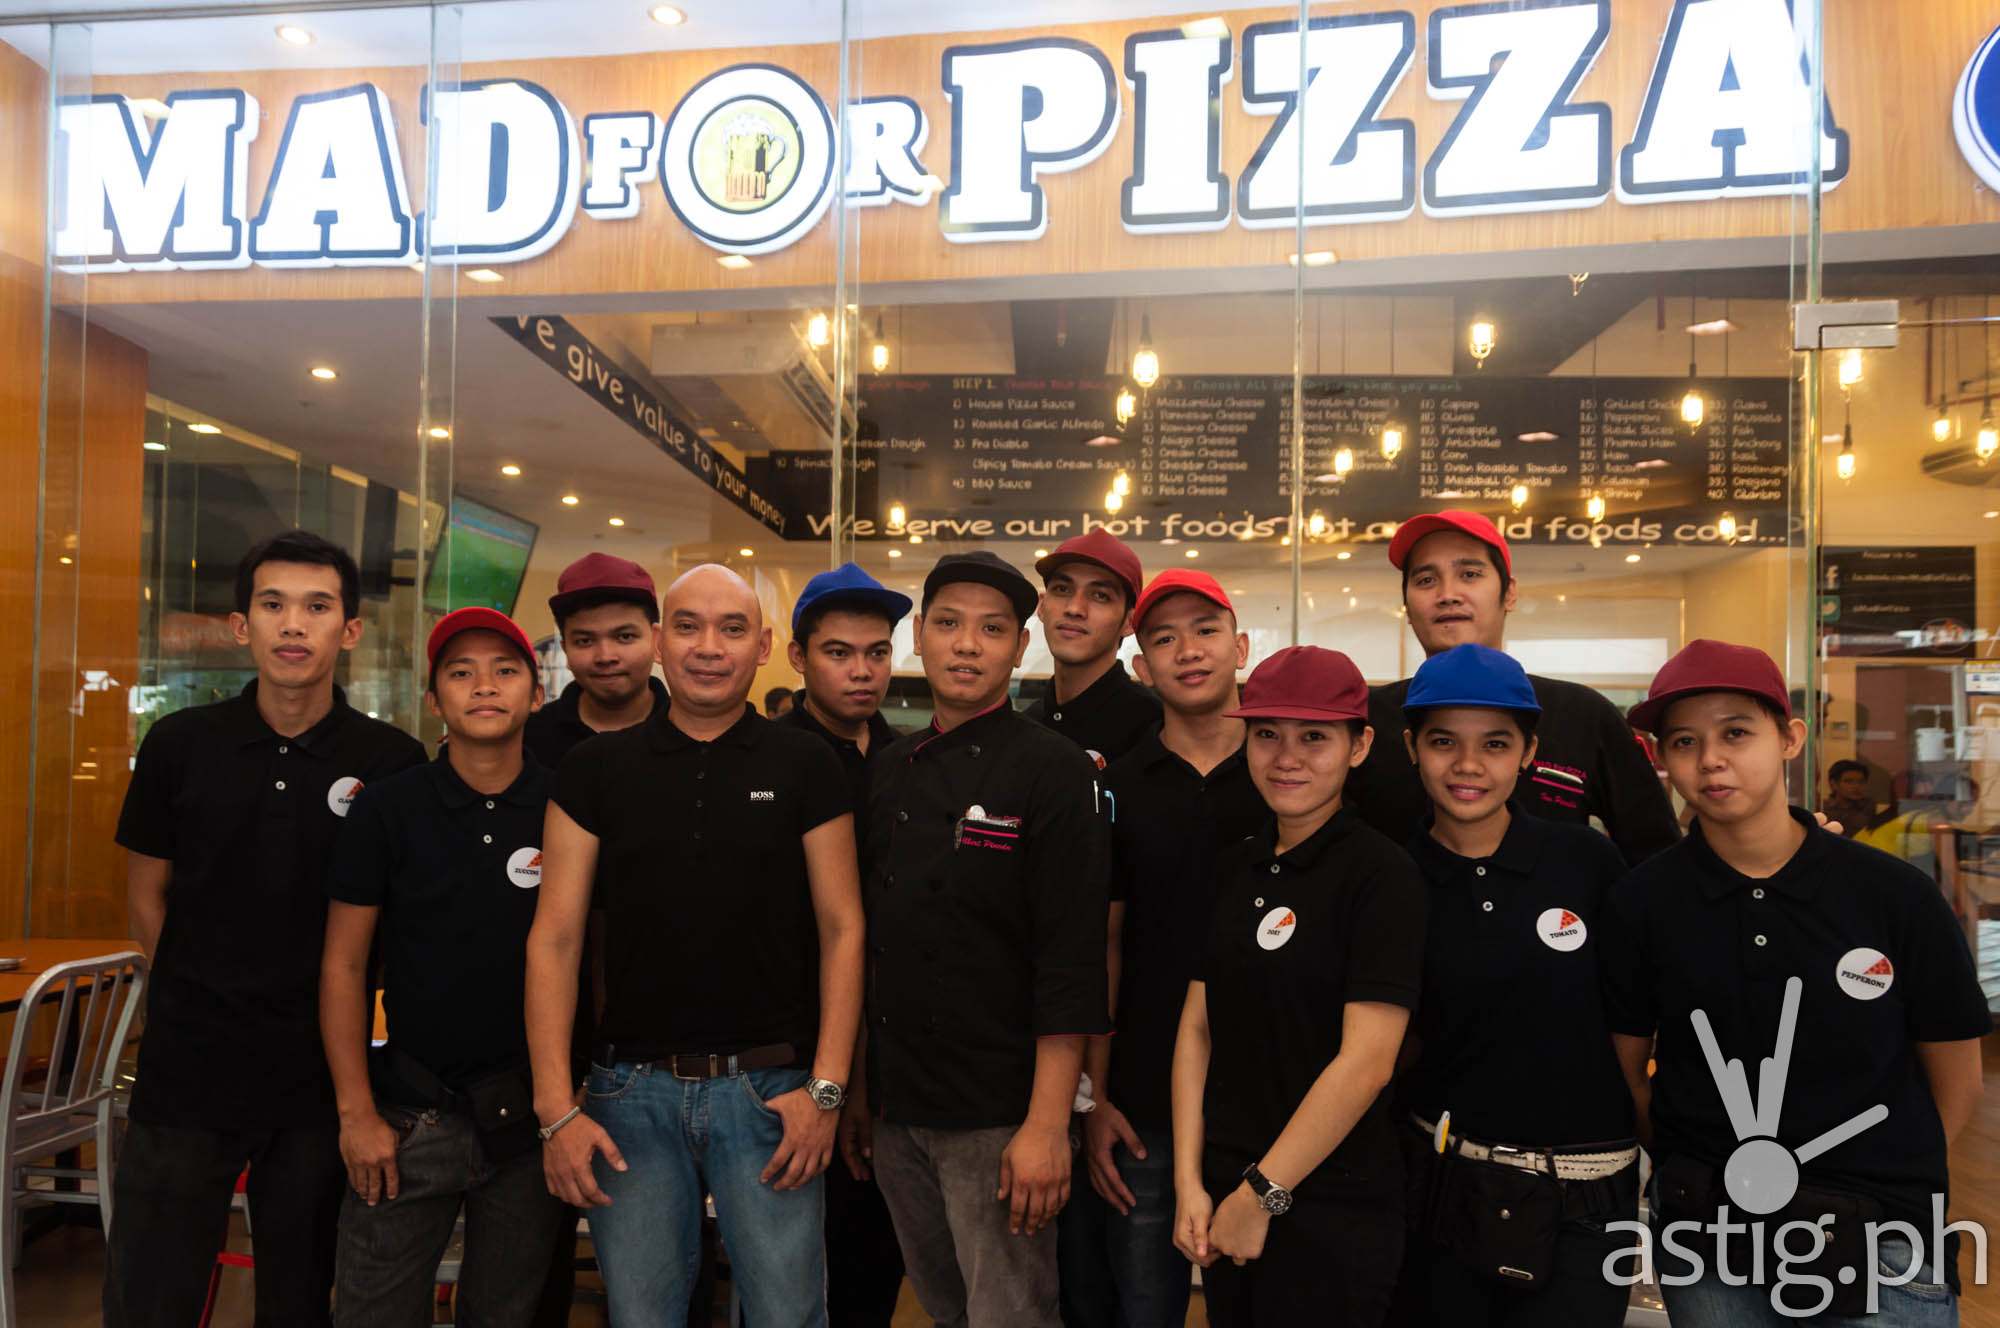 Mad for Pizza servers use names of ingredients as alias such as Pepper, Olives, Oregano, etc